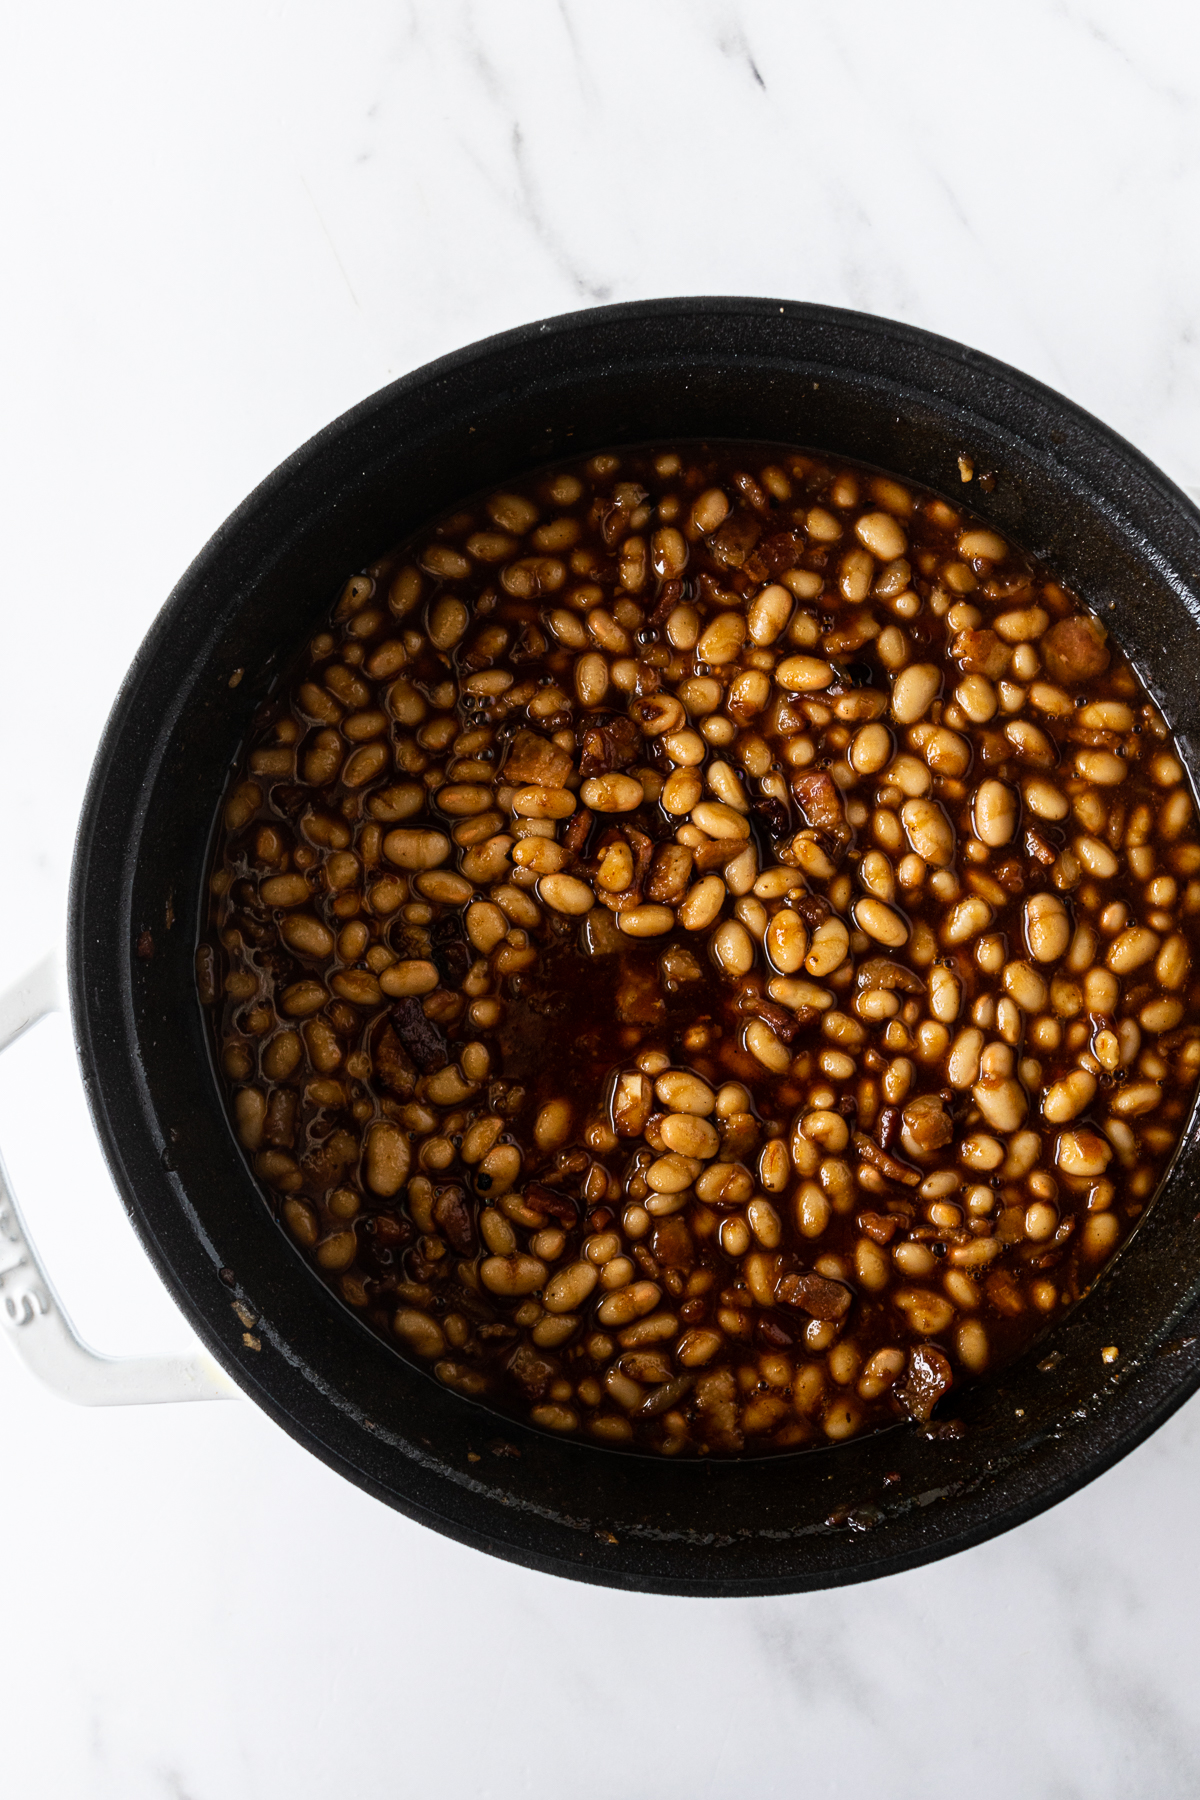 baked beans in a black pot.